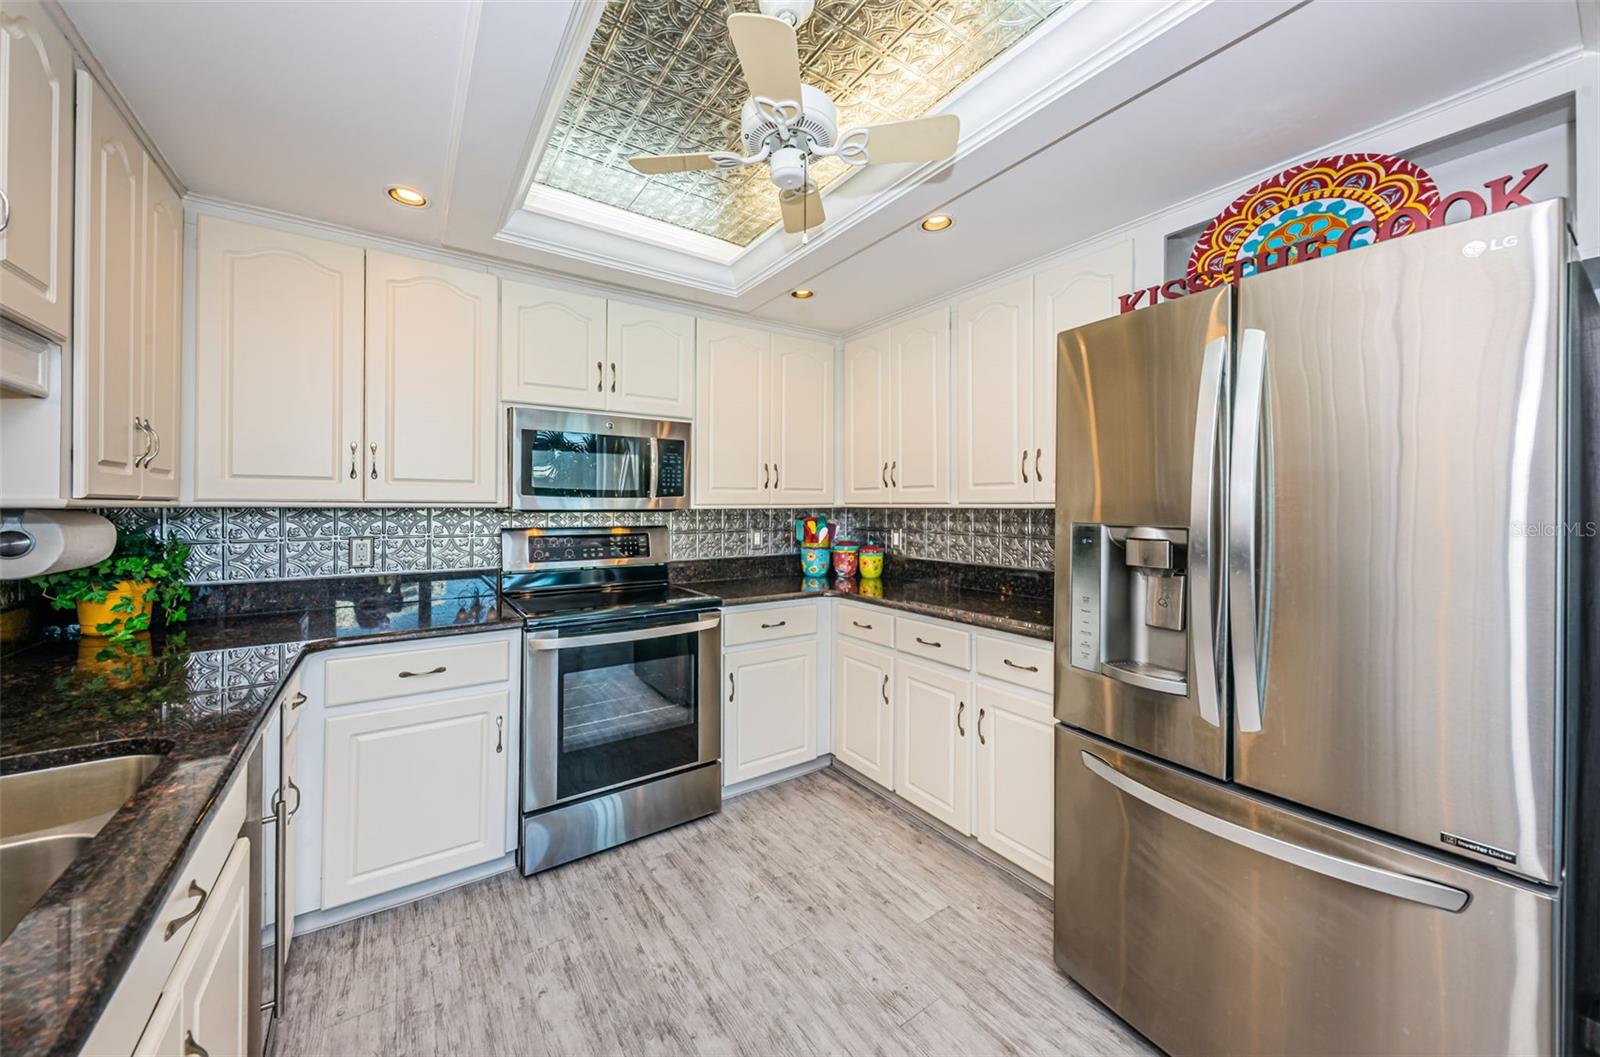 Well Accessorized Cucina Features Stainless Appliances, Granite Surfaces, Solid Wood Cabinetry and Plank Tile Floors.